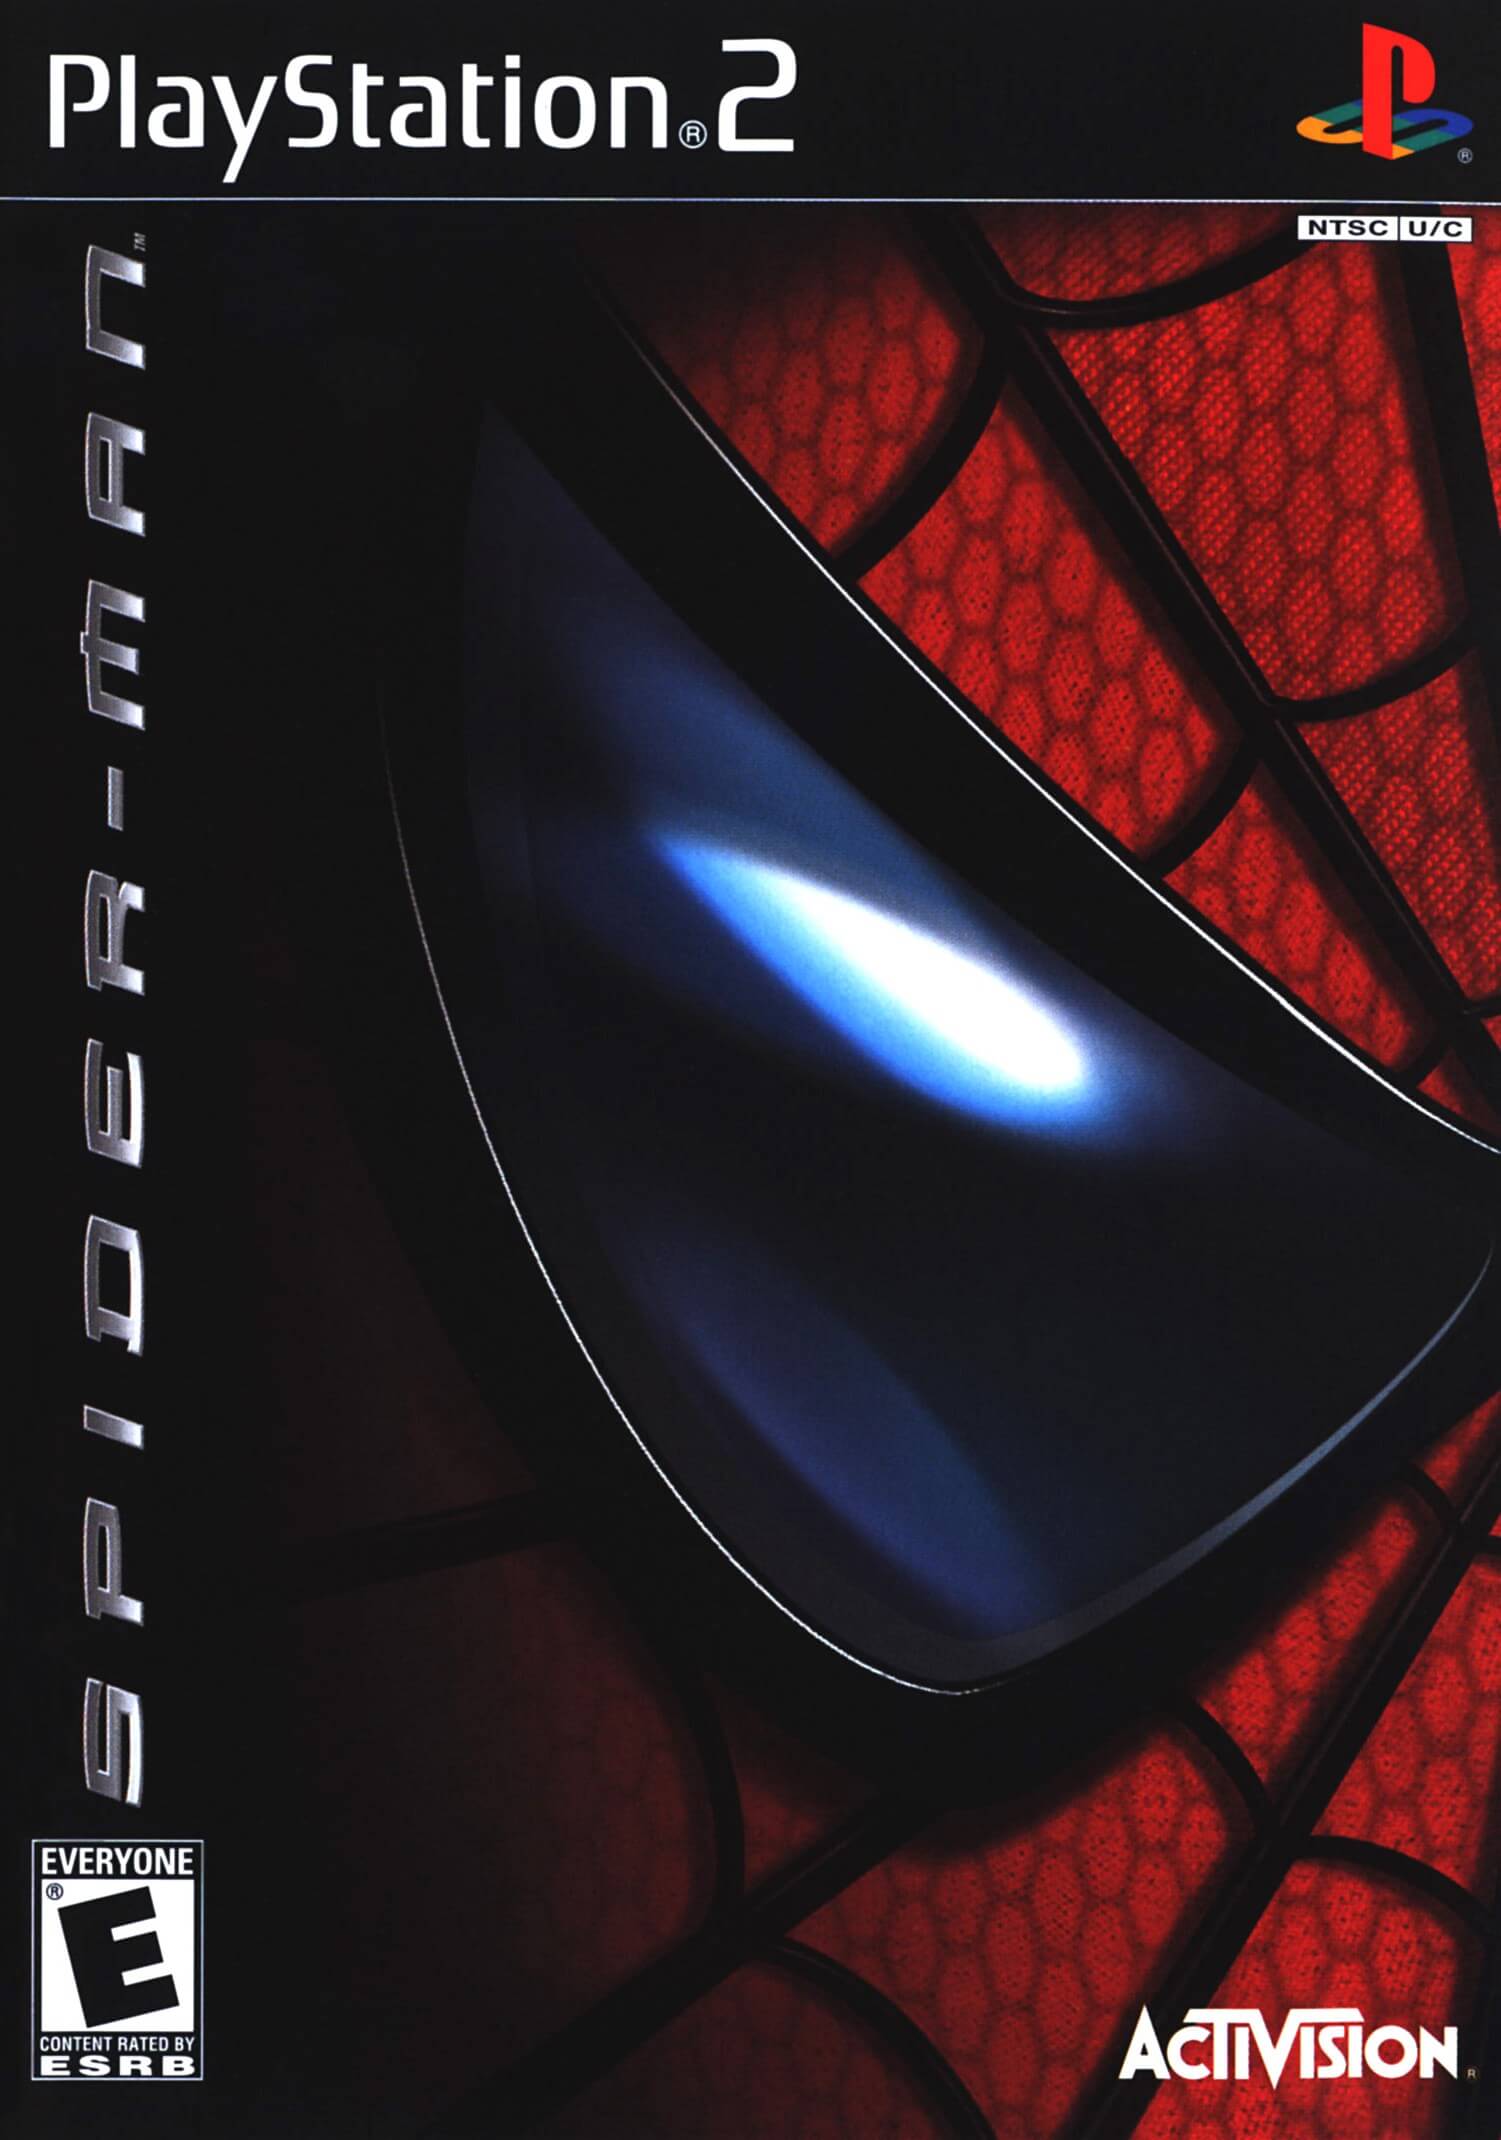 Spider-Man ROM & ISO - PS2 Game